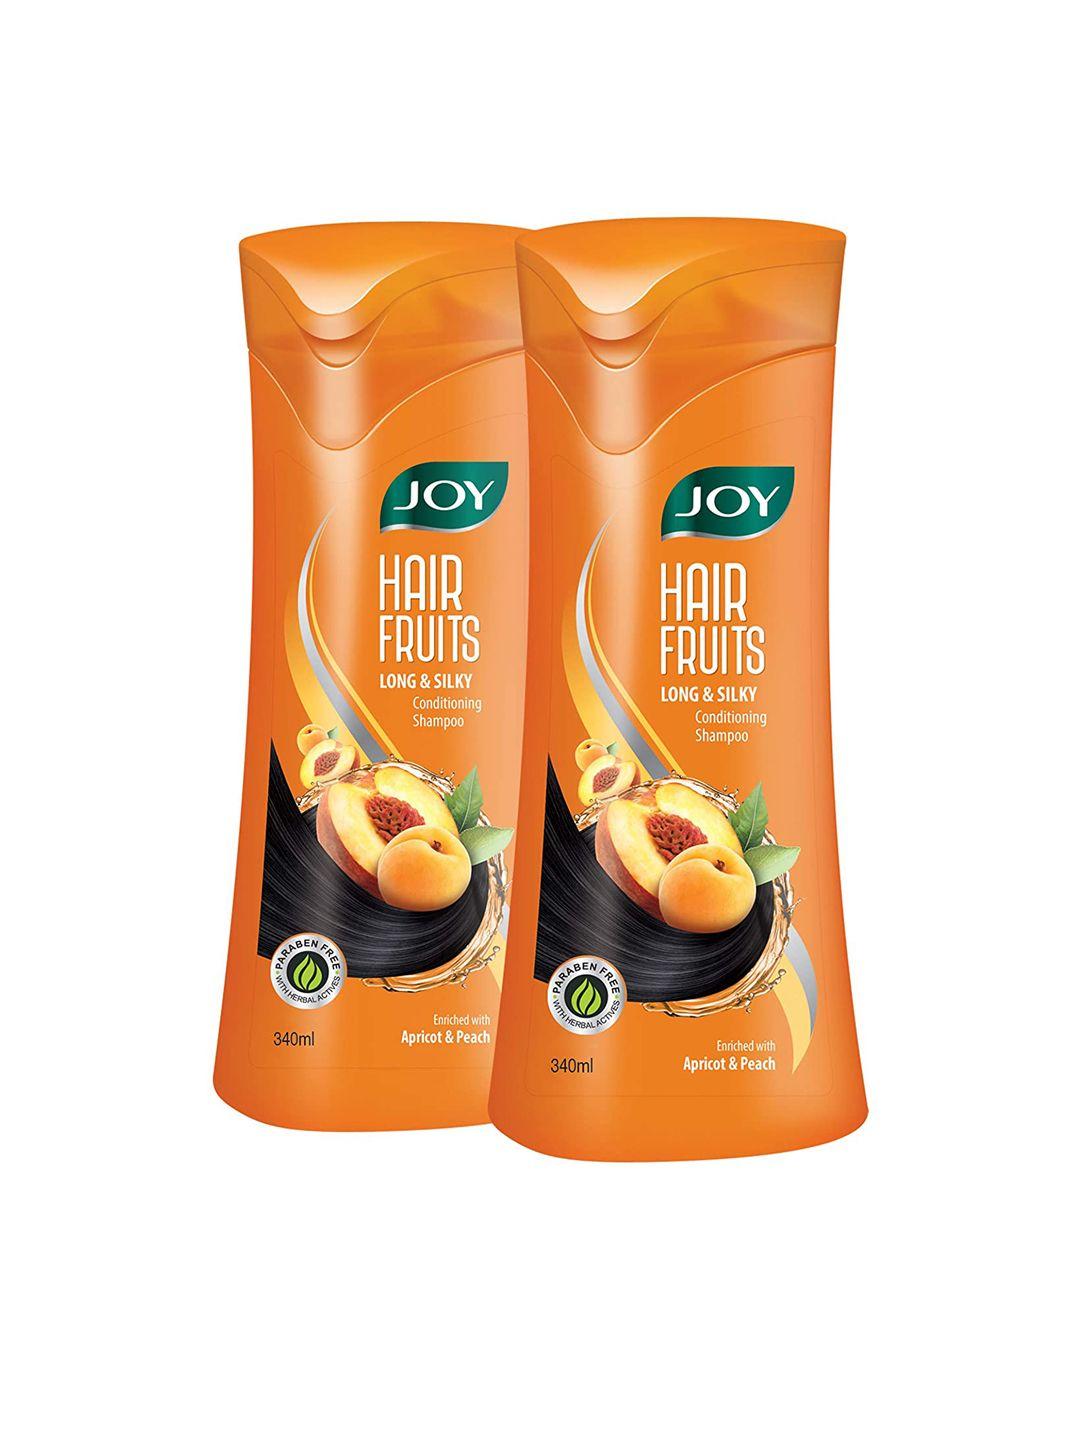 joy set of 2 hair fruits long & silky conditioning shampoo with apricot & peach-340ml each